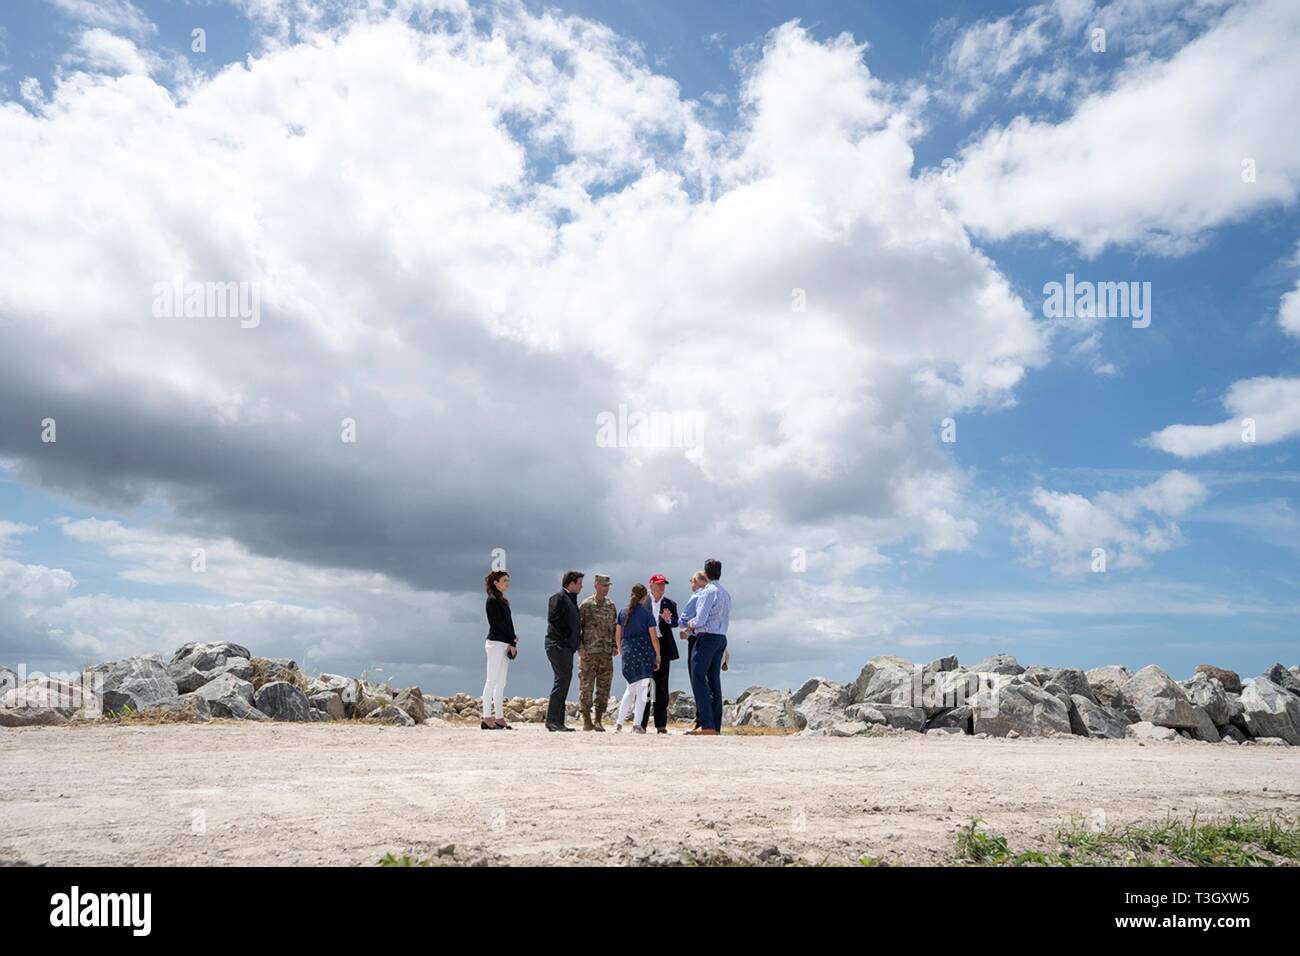 U.S President Donald Trump tours the Herbert Hoover Dike during a visit to Lake Okeechobee with Florida Gov. Ron DeSantis, Sen. Marco Rubio, and Sen. Rick Scott March 29, 2019 in Canal Point, Florida. The Herbert Hoover Dike is a 143-mile earthen dam that surrounds Lake Okeechobee and currently under a massive renovation and repair project. Stock Photo